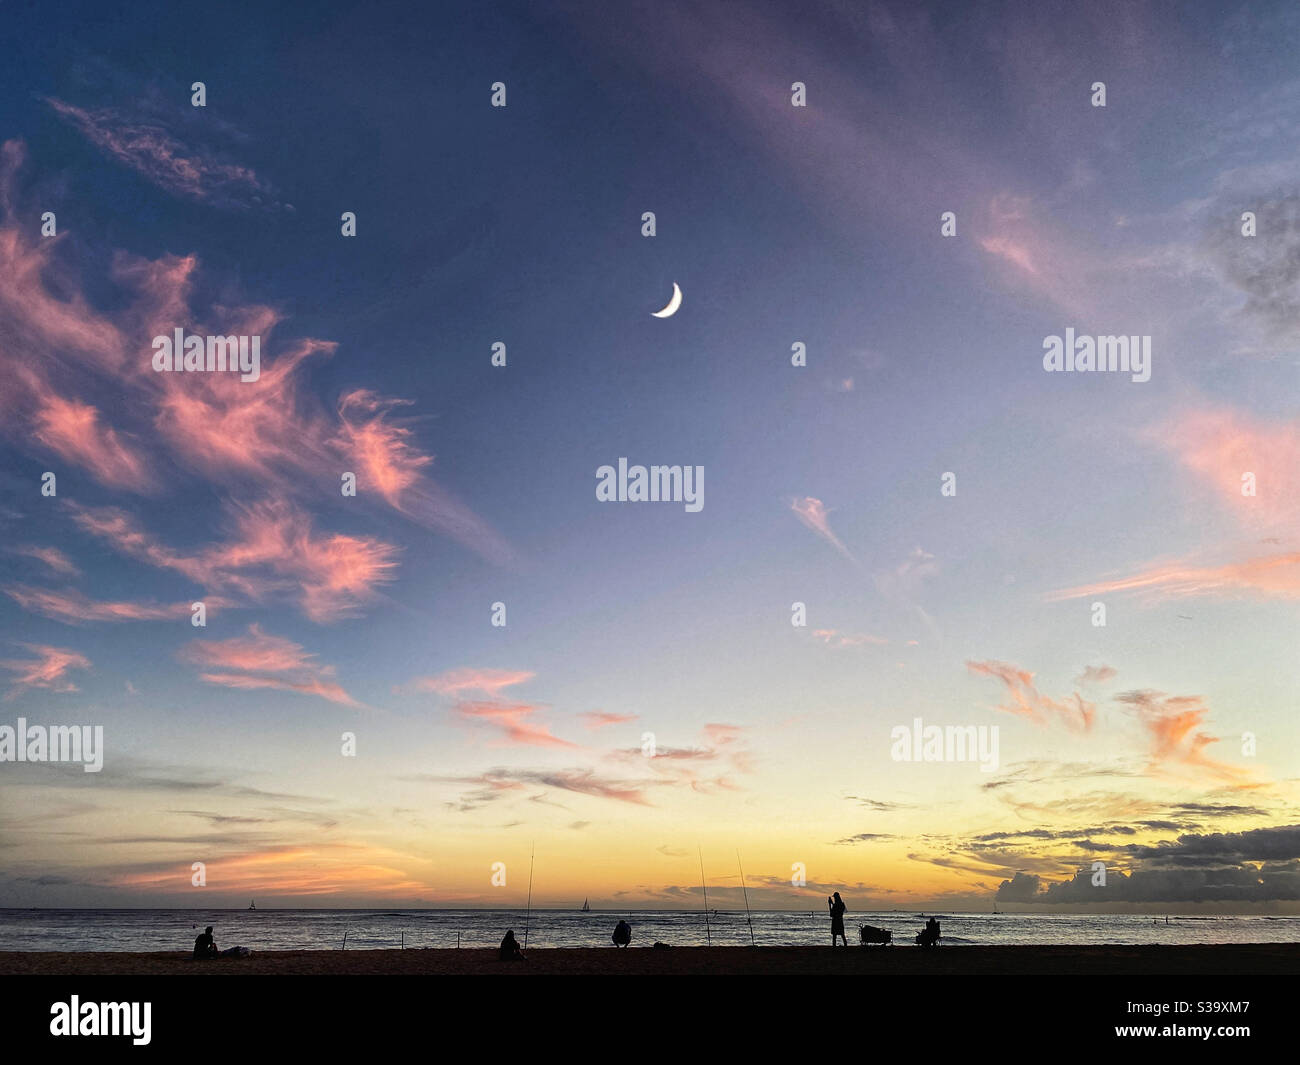 A crescent moon over silhouetted figures fishing on a beach at sunset Stock Photo